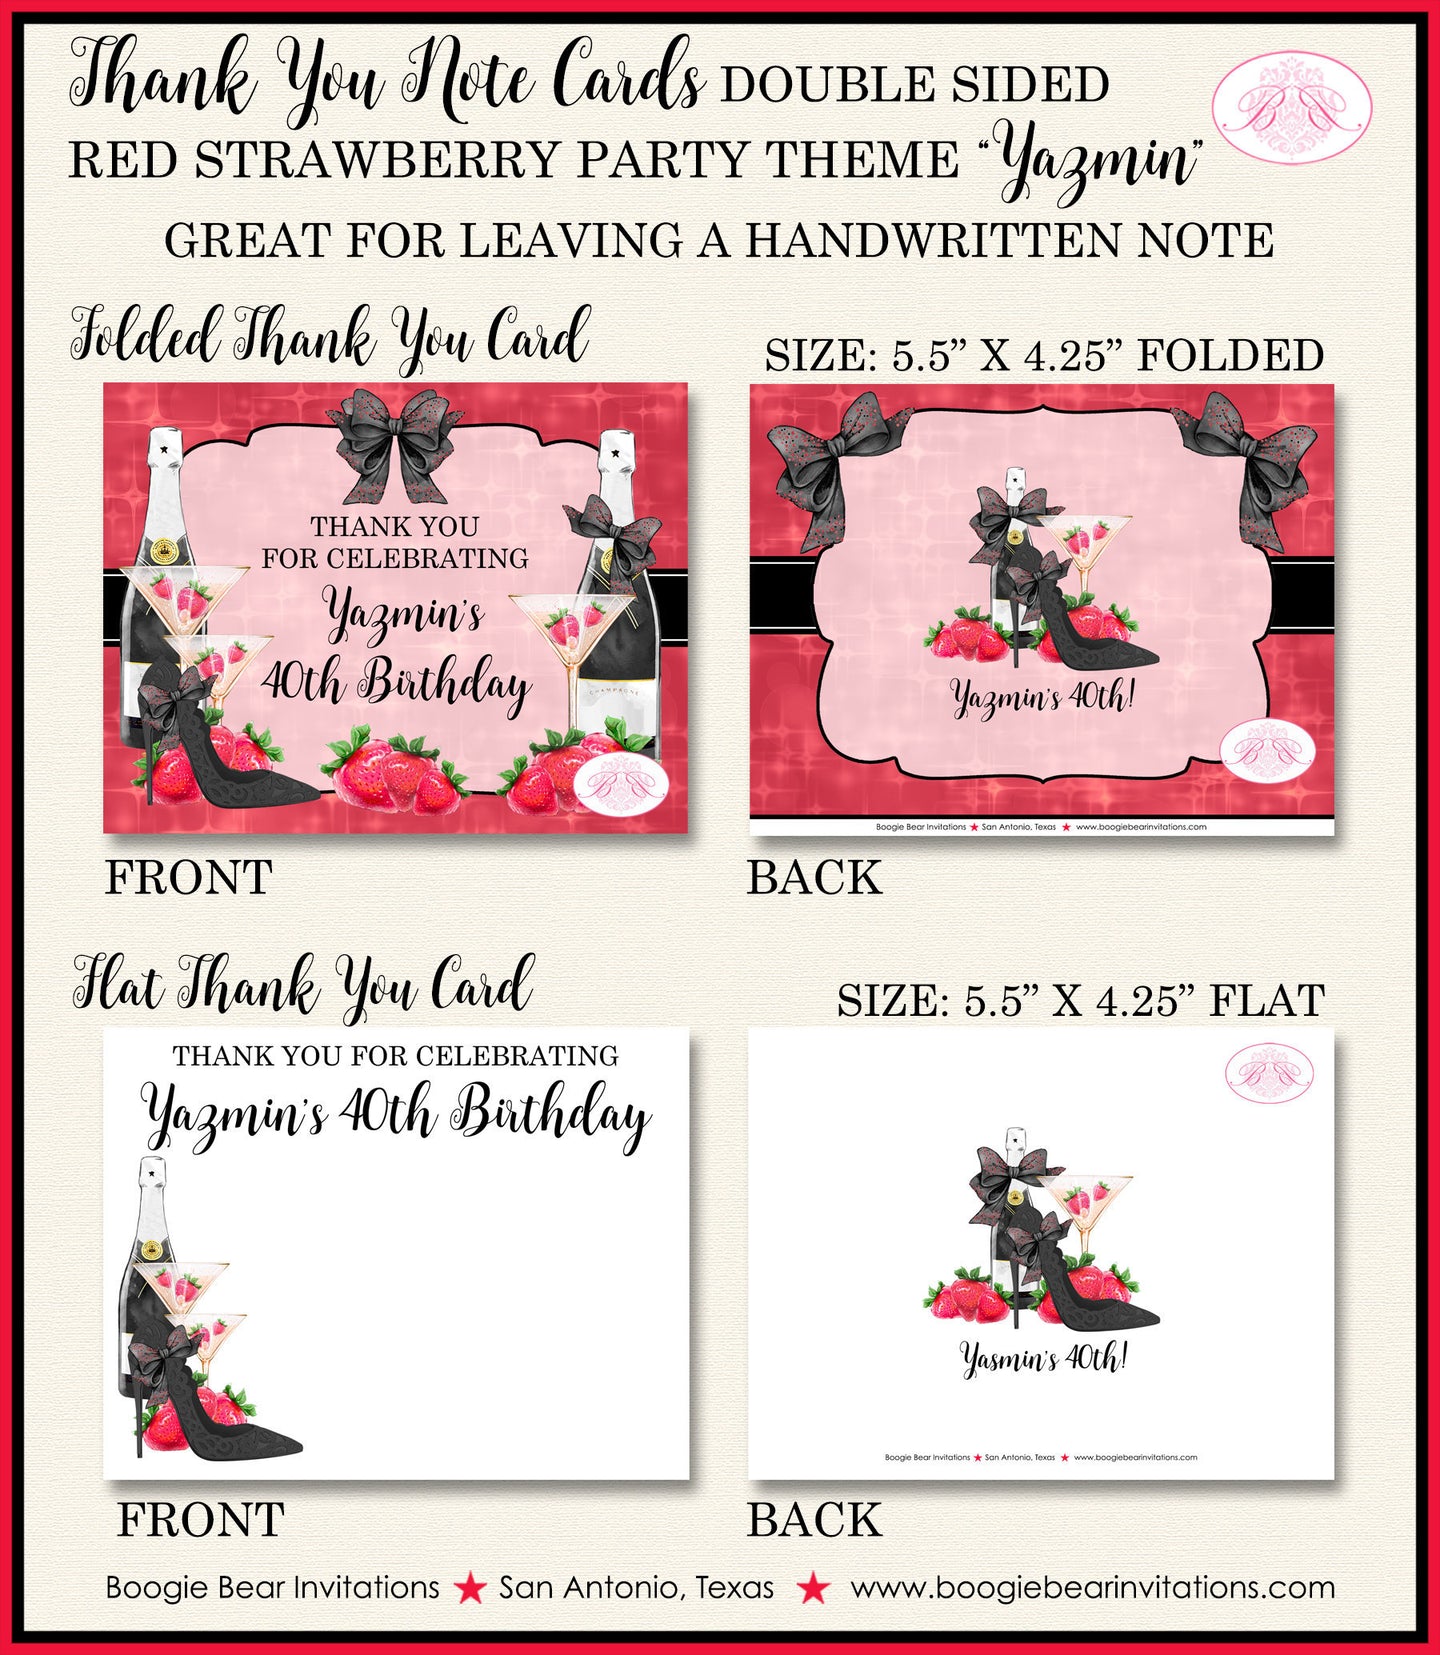 Red Strawberry Party Thank You Cards Birthday Favor Note Champagne Berry Drink Black Cocktails Boogie Bear Invitations Yazmin Theme Printed